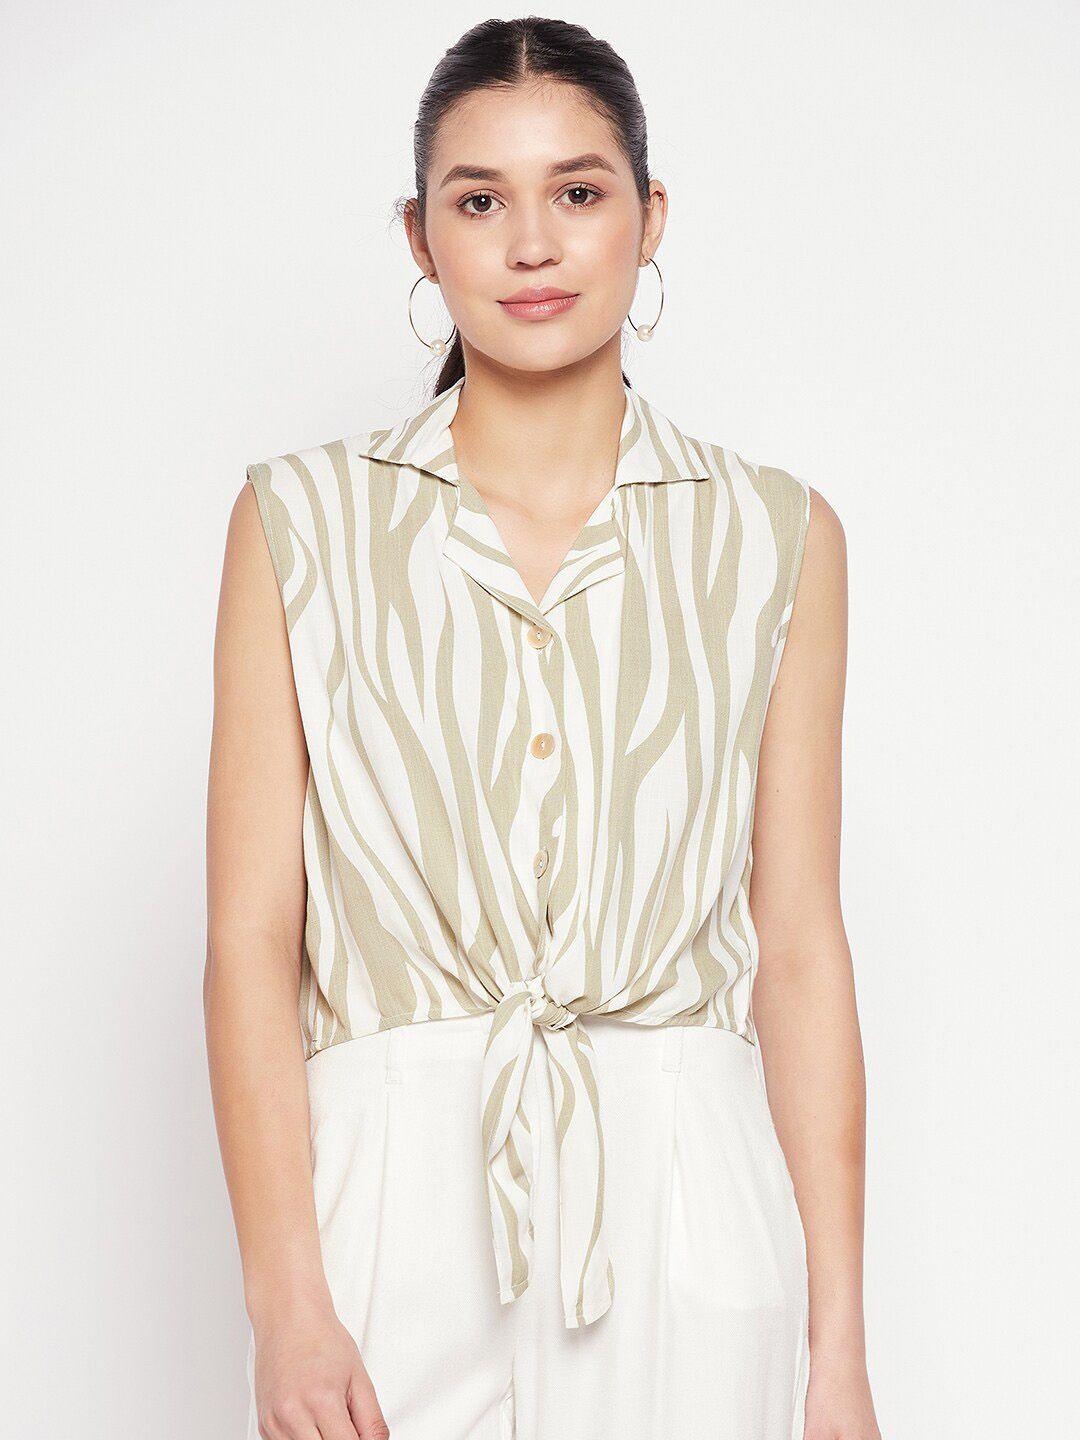 madame striped tie-up shirt style top